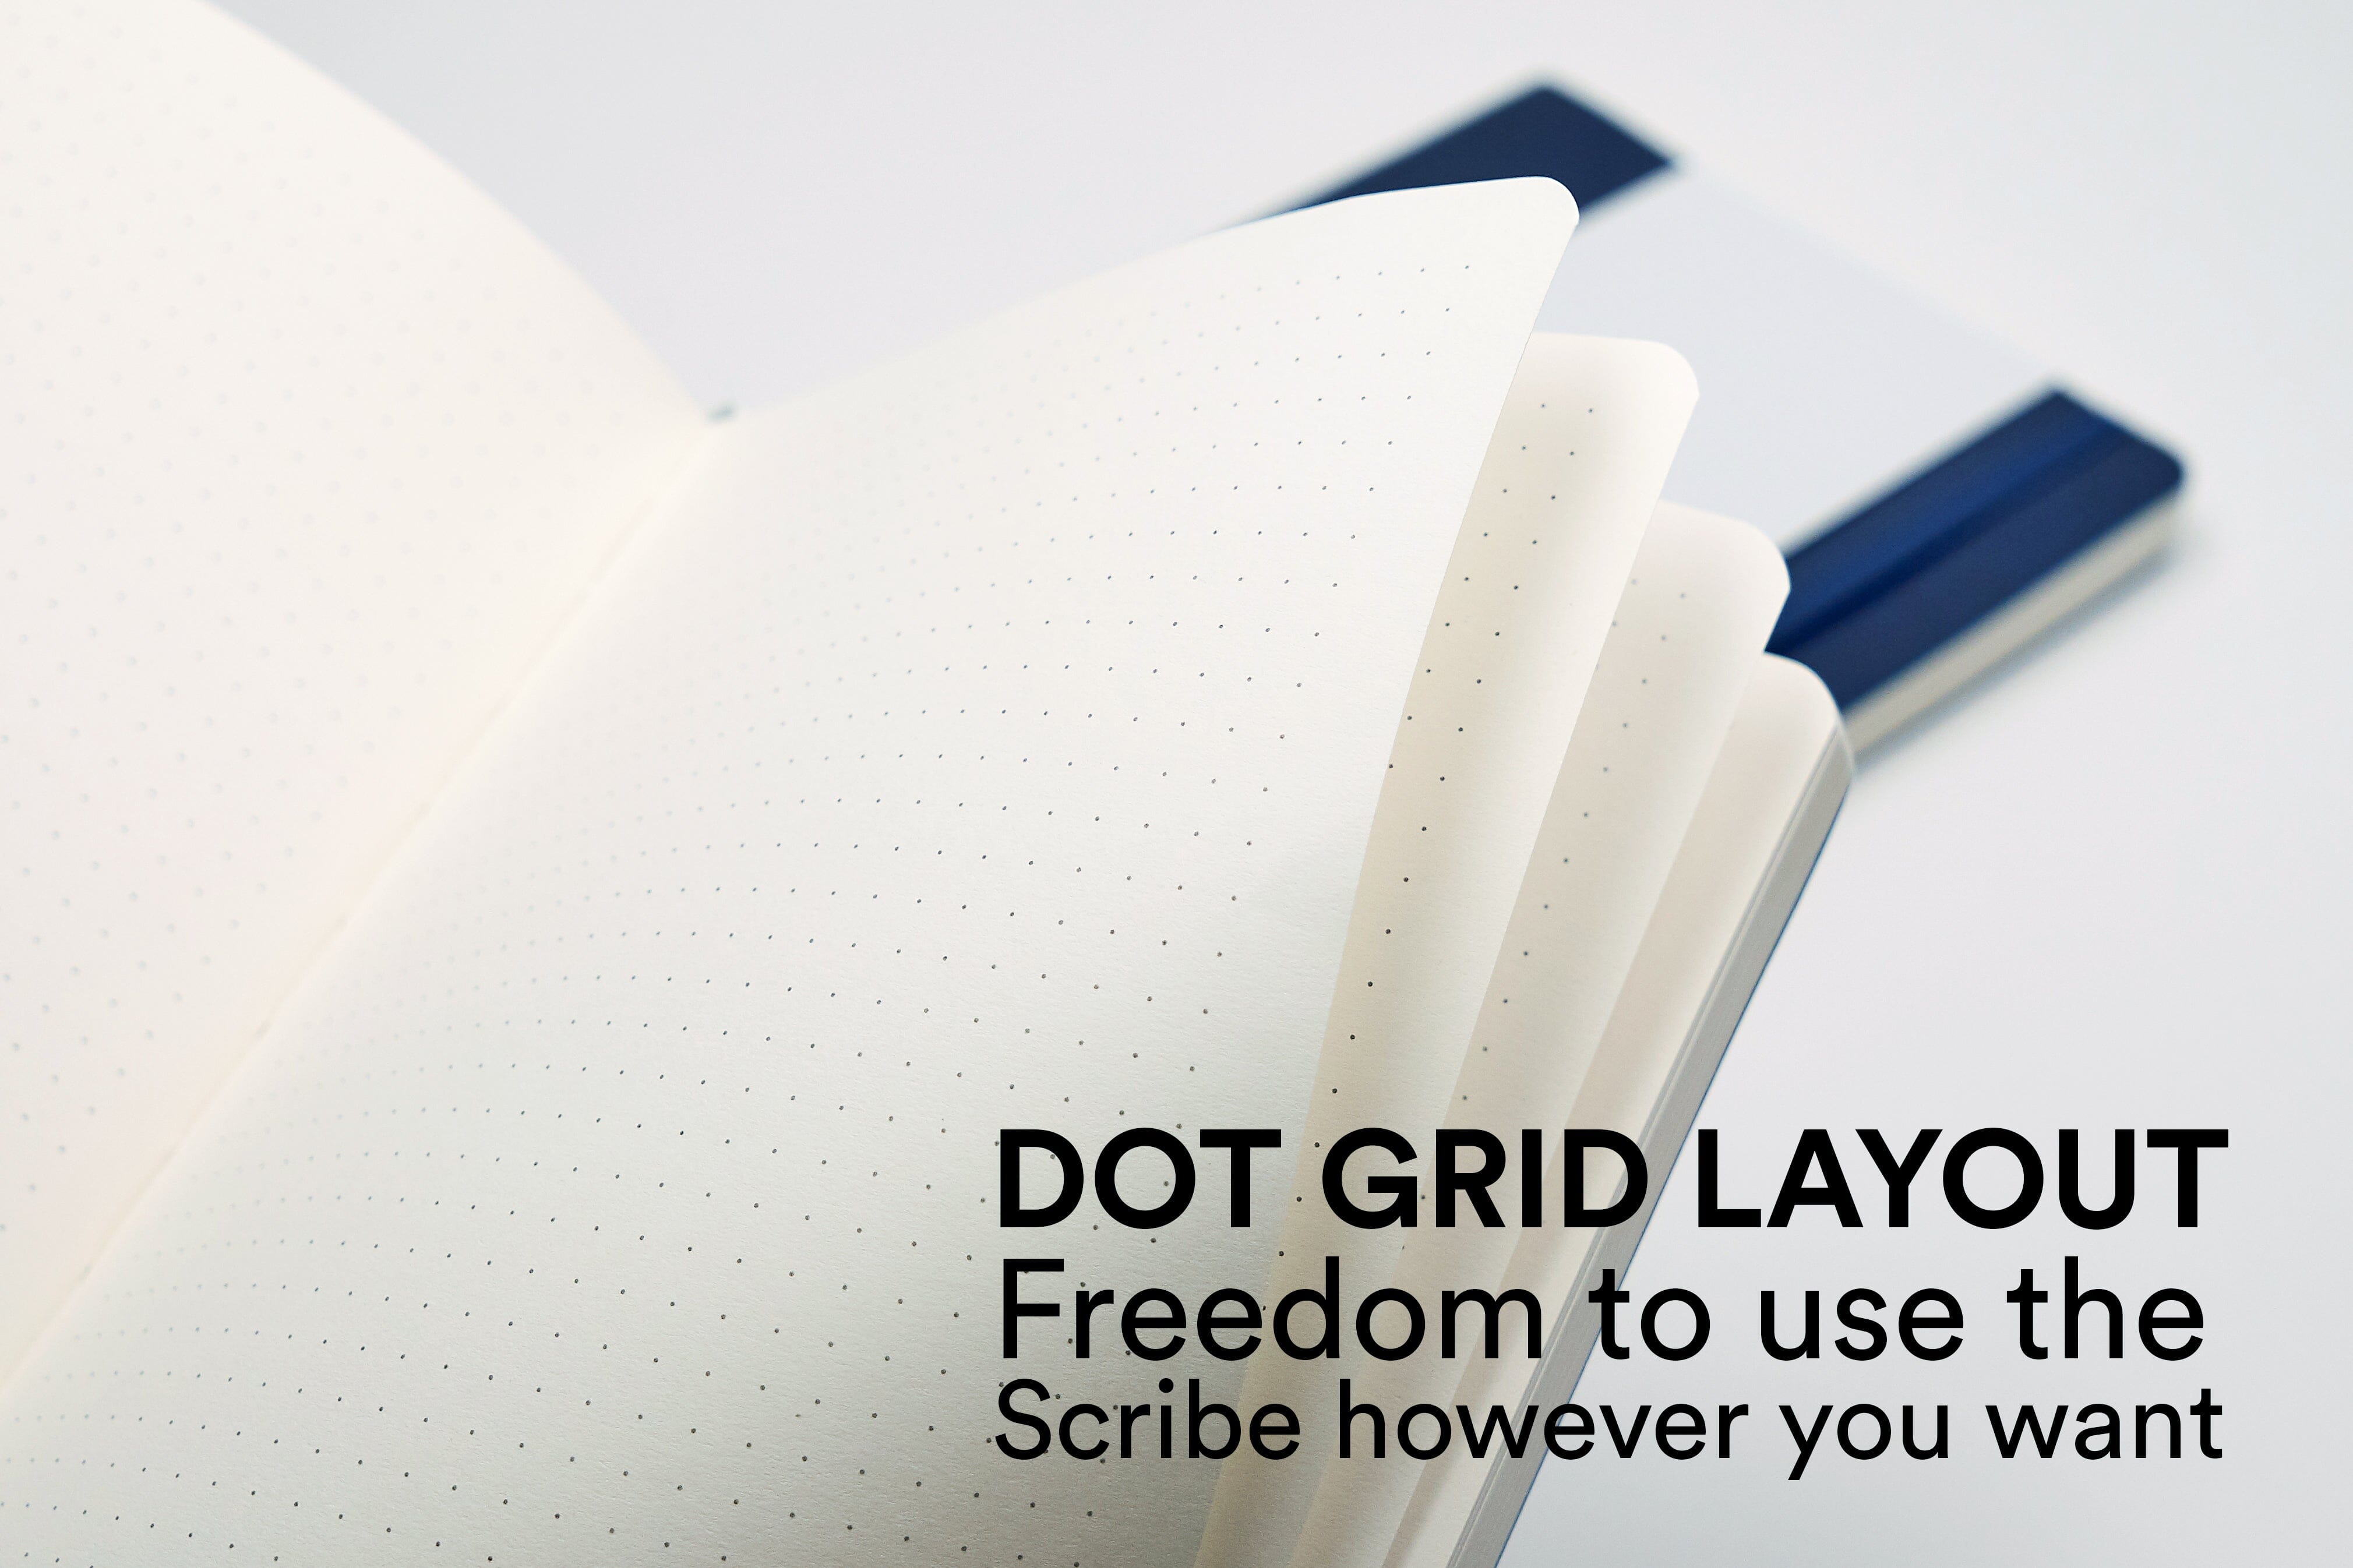 Scribe opened with the text "dot grid layout" and "freedom to use the Scribe however you want" 